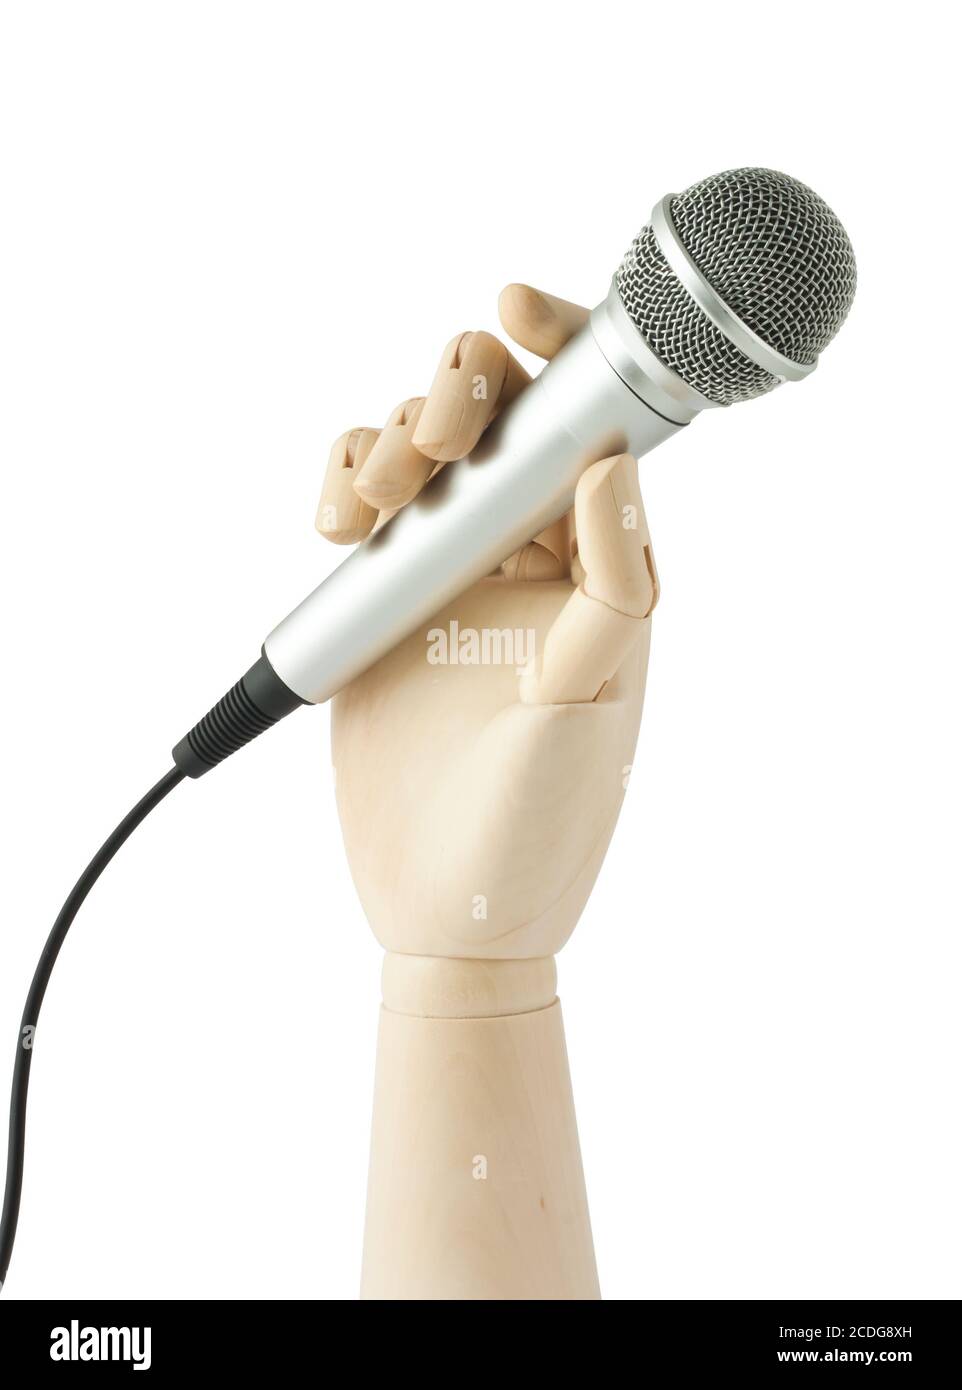 wooden hand holding a microphone Stock Photo